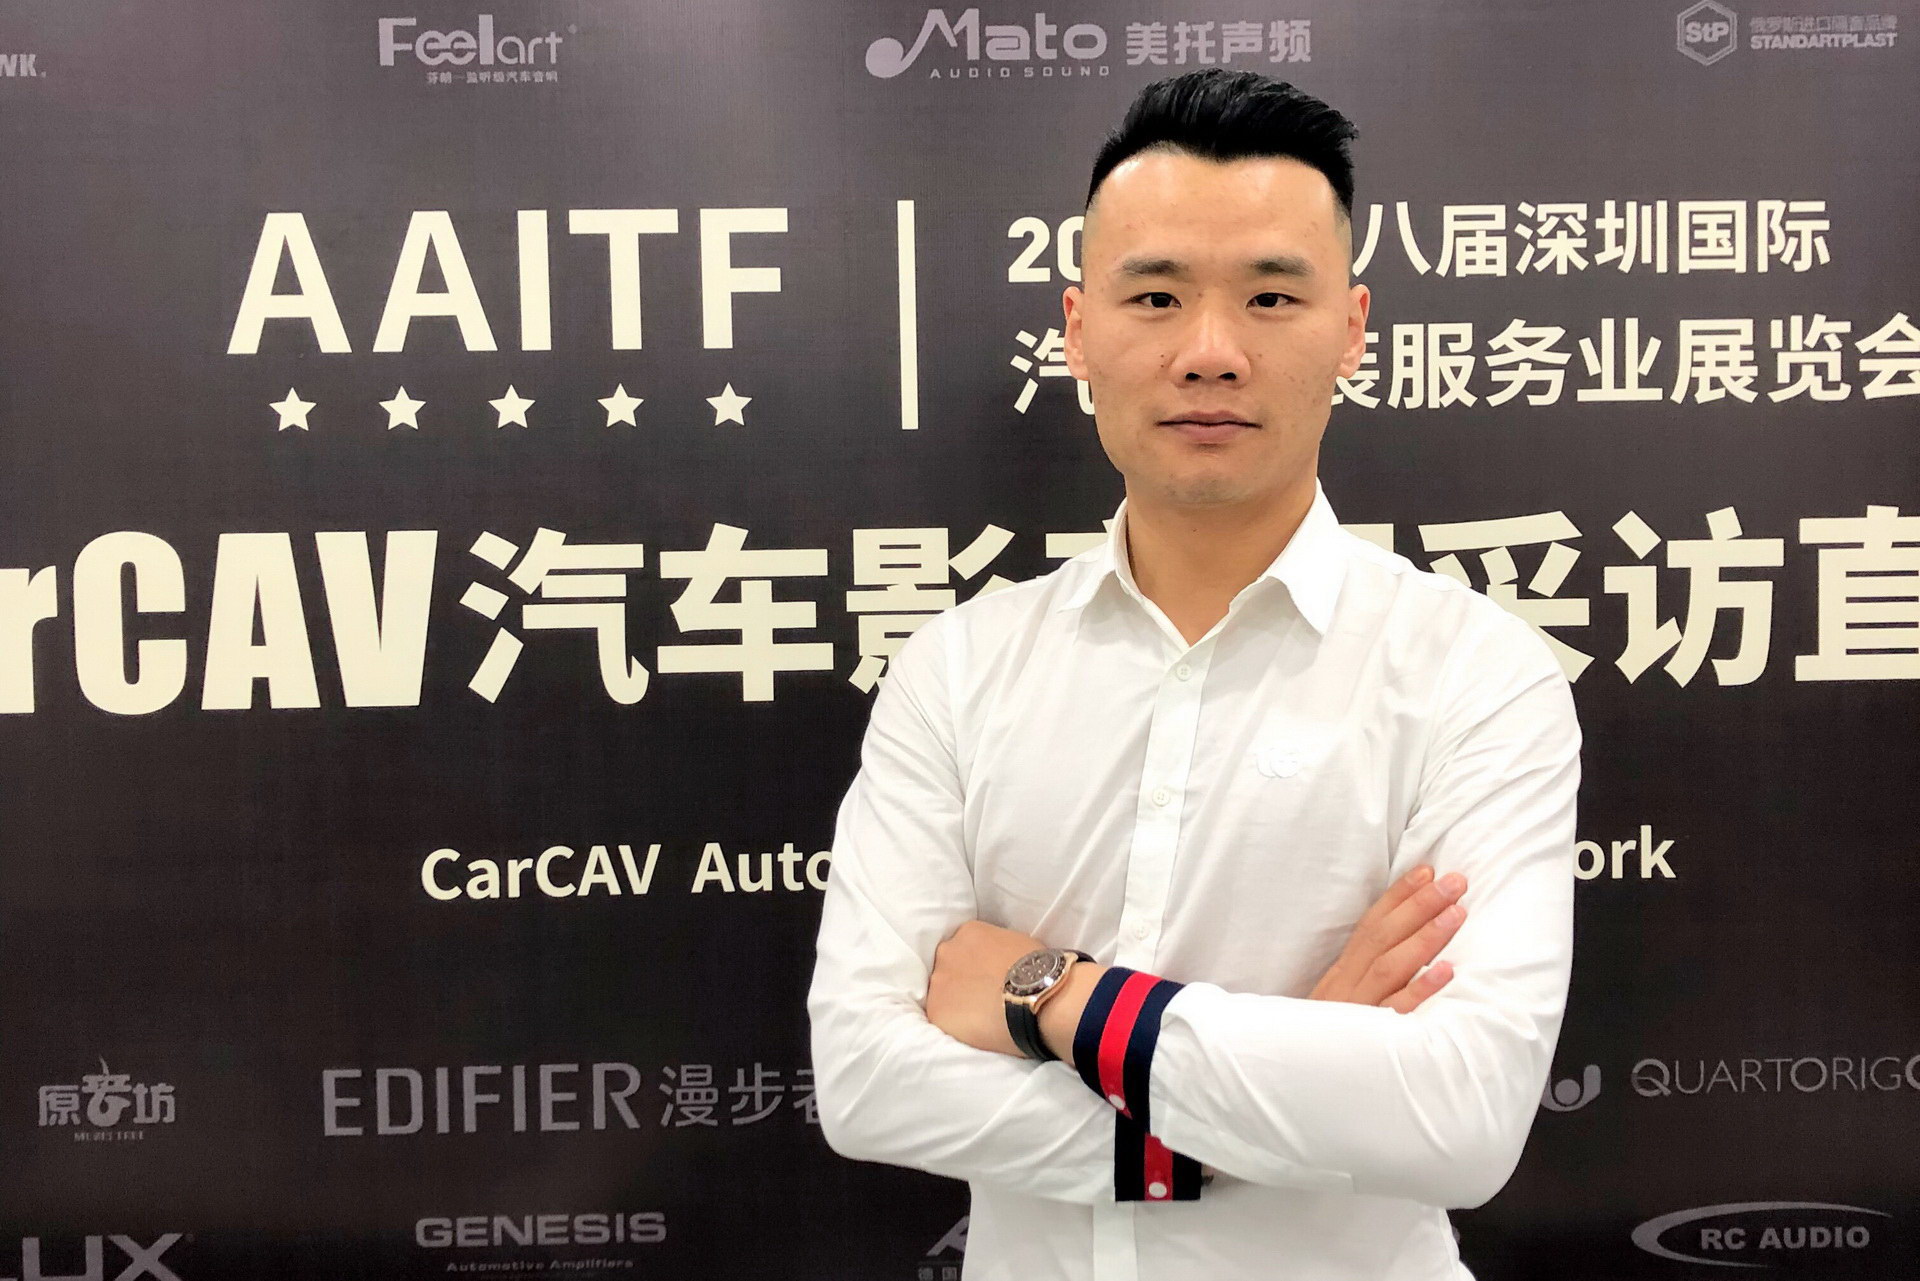 Chen Yi, General Manager of Baifu: Our market target in 2019 is very clear!!!